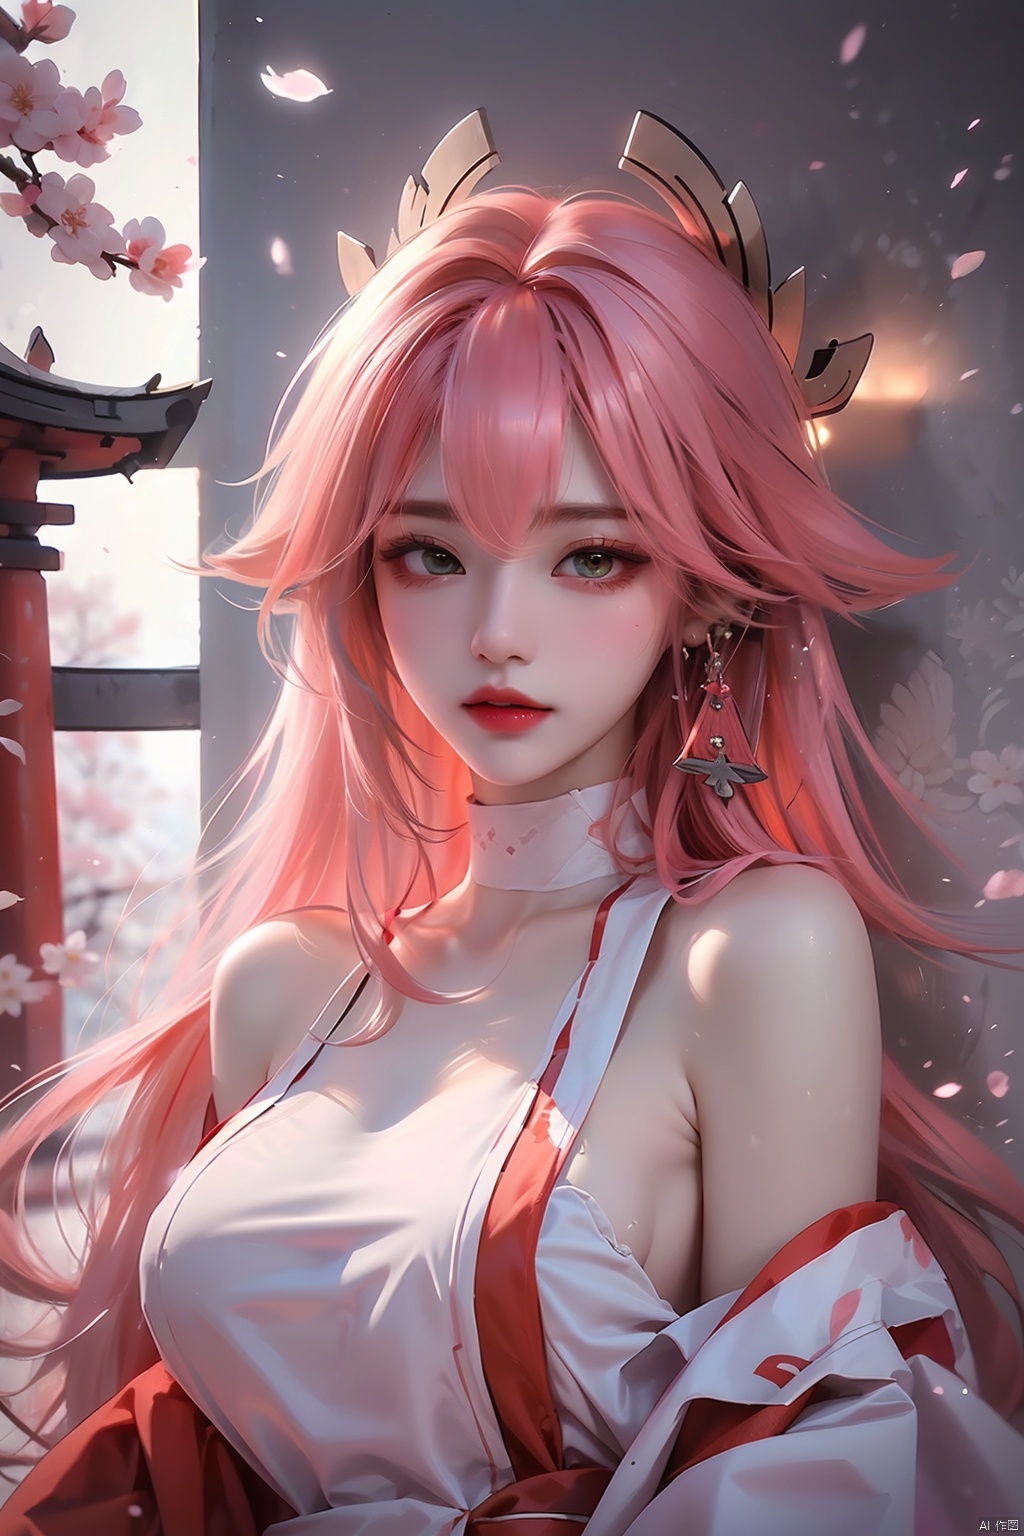  (Masterpiece, Excellent, 1girl, solo, complex details, color difference), realism, ((medium breath)), off-the-shoulders, big breasts, sexy, Yae Miko, long pink hair, red headdress, red highlight, hair above one eye, green eyes, earrings, sharp eyes, perfectly symmetrical figure, choker, neon shirt, open jacket, turtleneck sweater, against the wall, brick wall, graffiti, dim lighting, alley, looking at the audience, ((mean, seductive, charming)), ((cherry blossom background ))),((Japanese temple background)))), (((Glow-in-the-dark background))), yae miko, (\meng ze\)